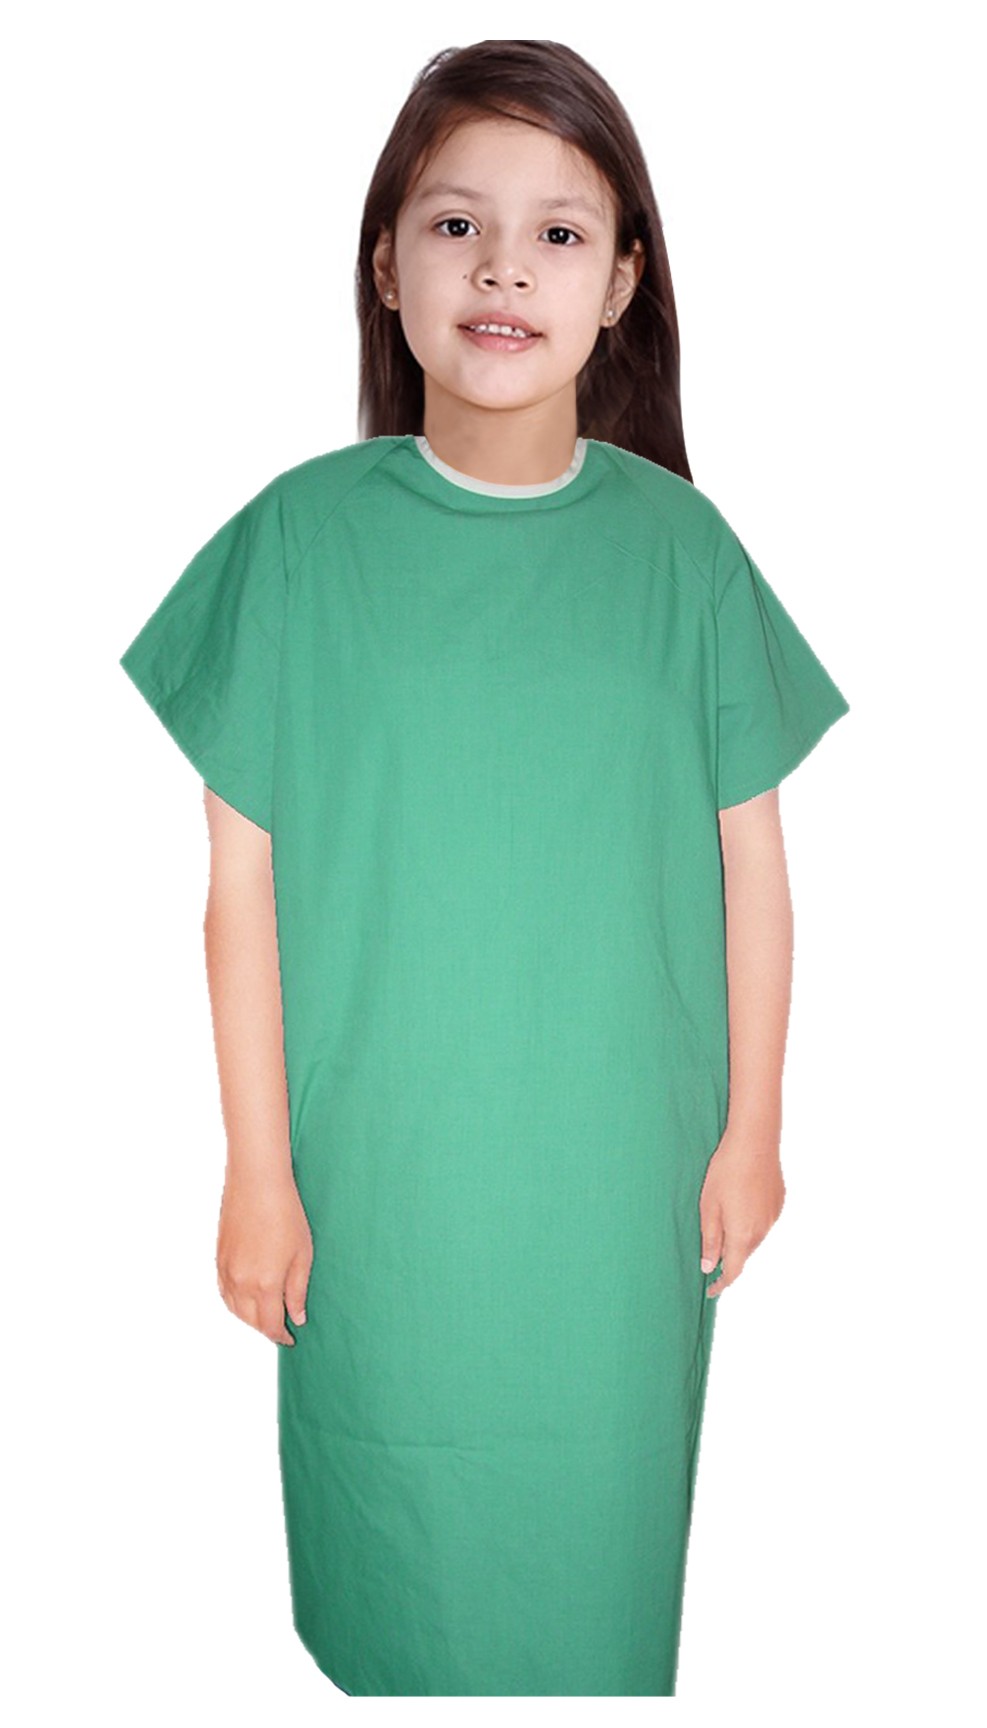 Children Patient Gown Half Sleeves with Matching piping Back Open, Tie-able from Two Points Chest 33 Inches Length 26 Inches And Chest 41 Inches Length 35 Inches (Available in 37 Color)